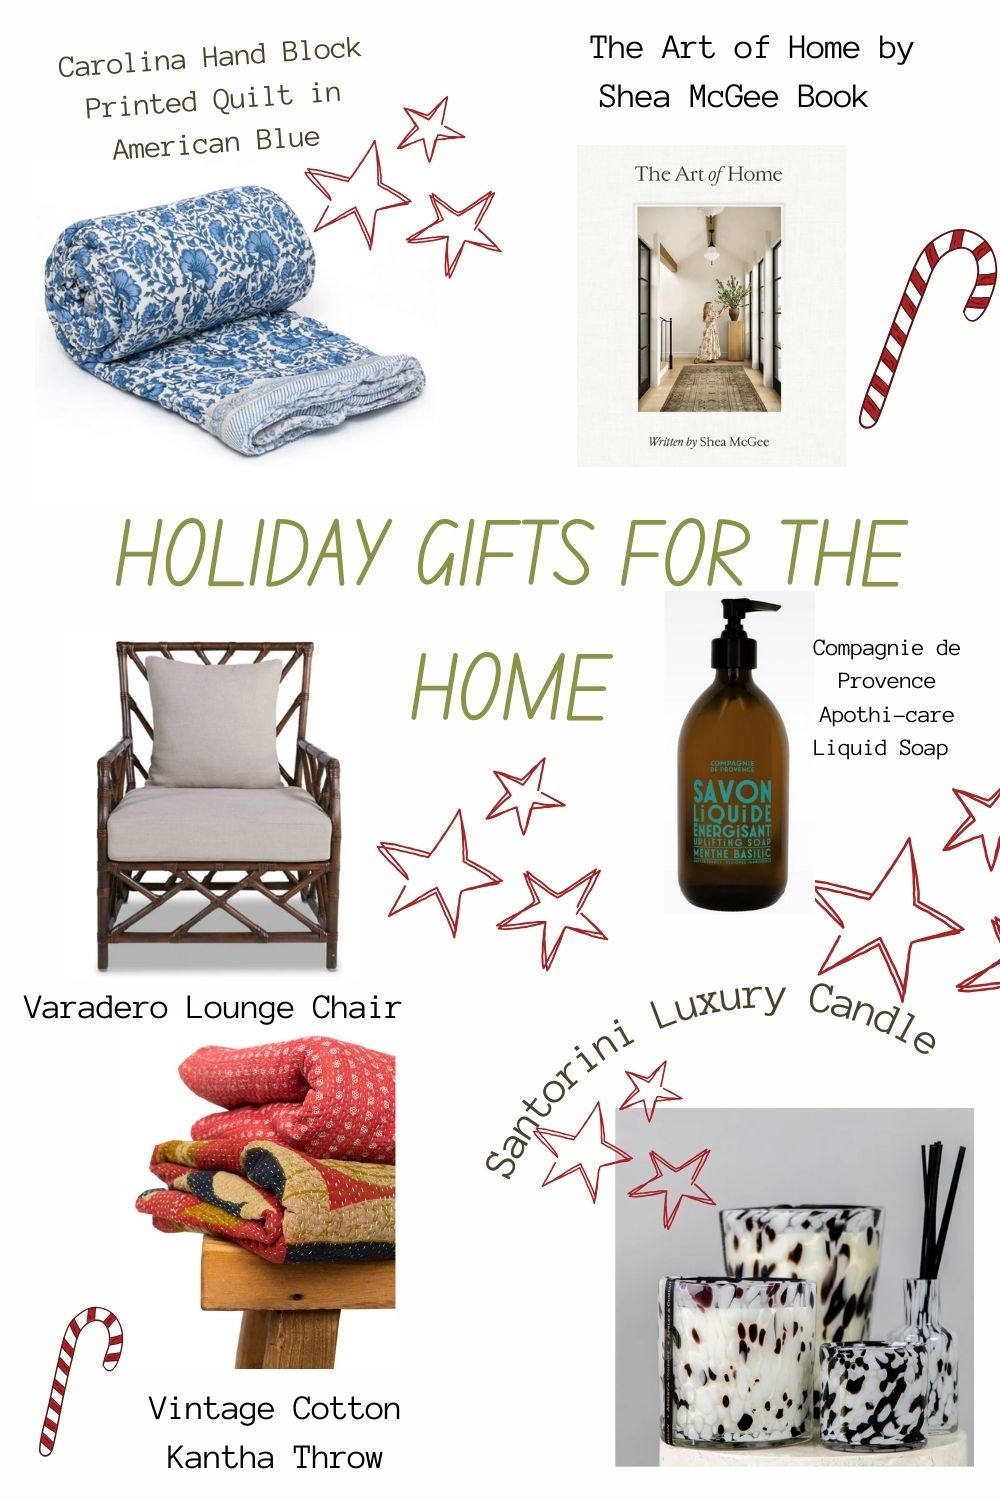 HOLIDAY GIFTS FOR THE HOME